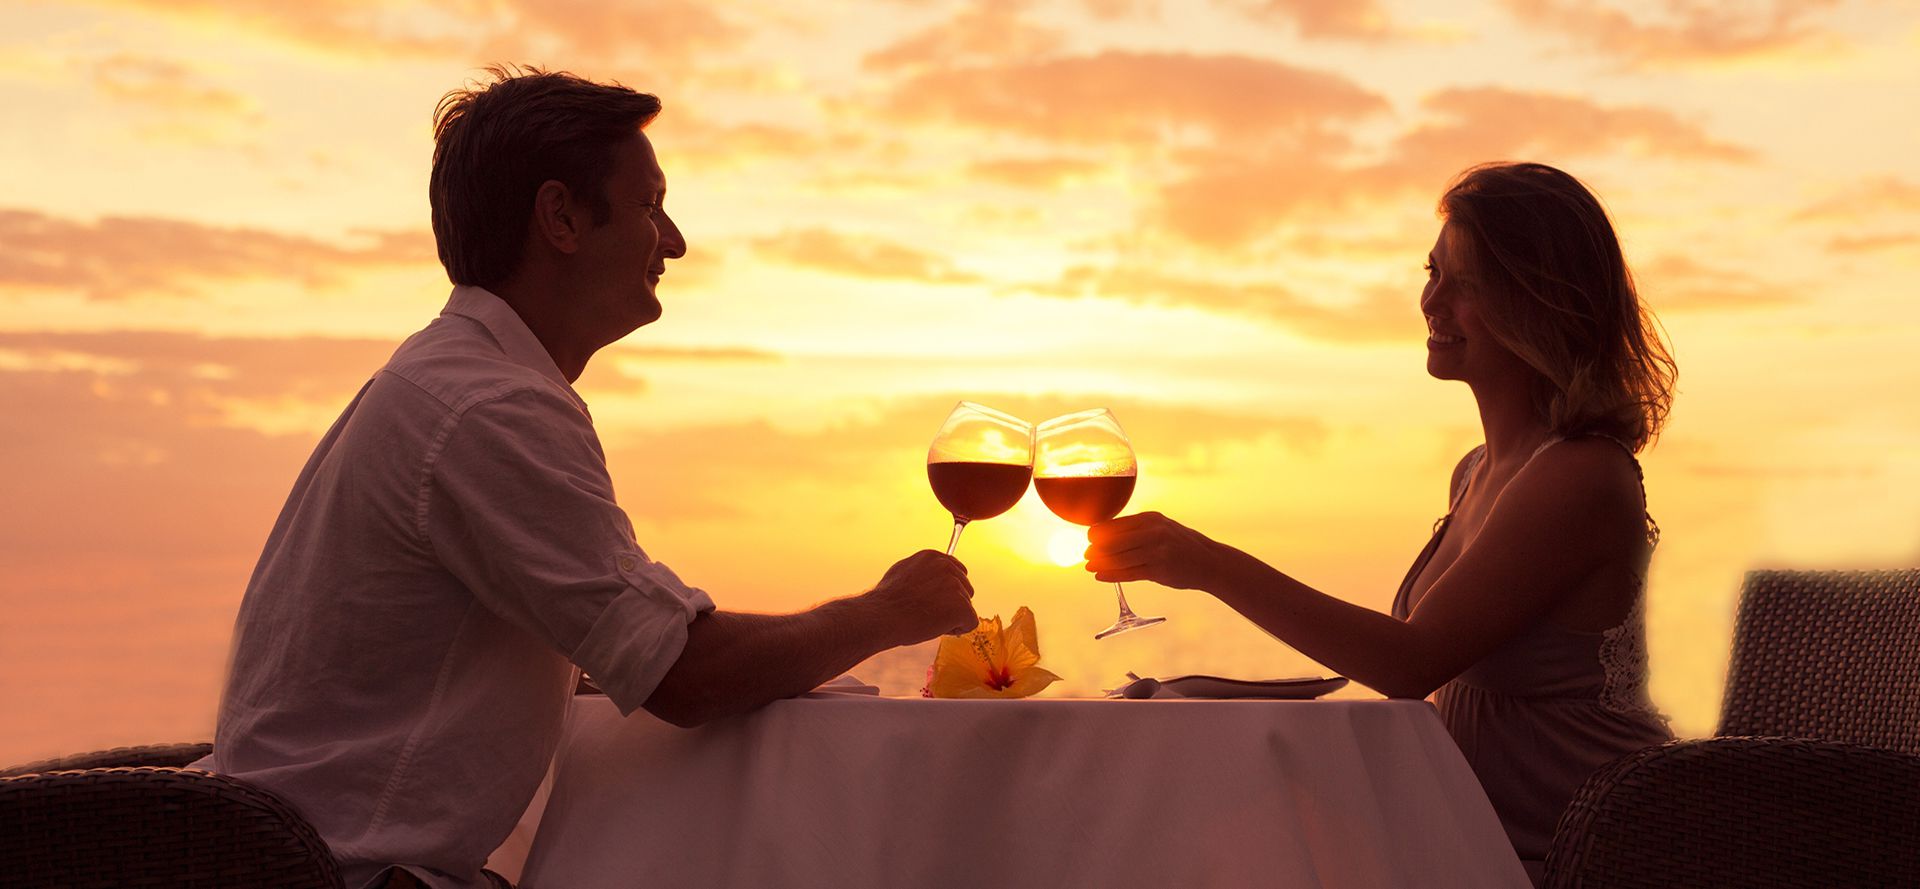 Dating with rich man at sunset.